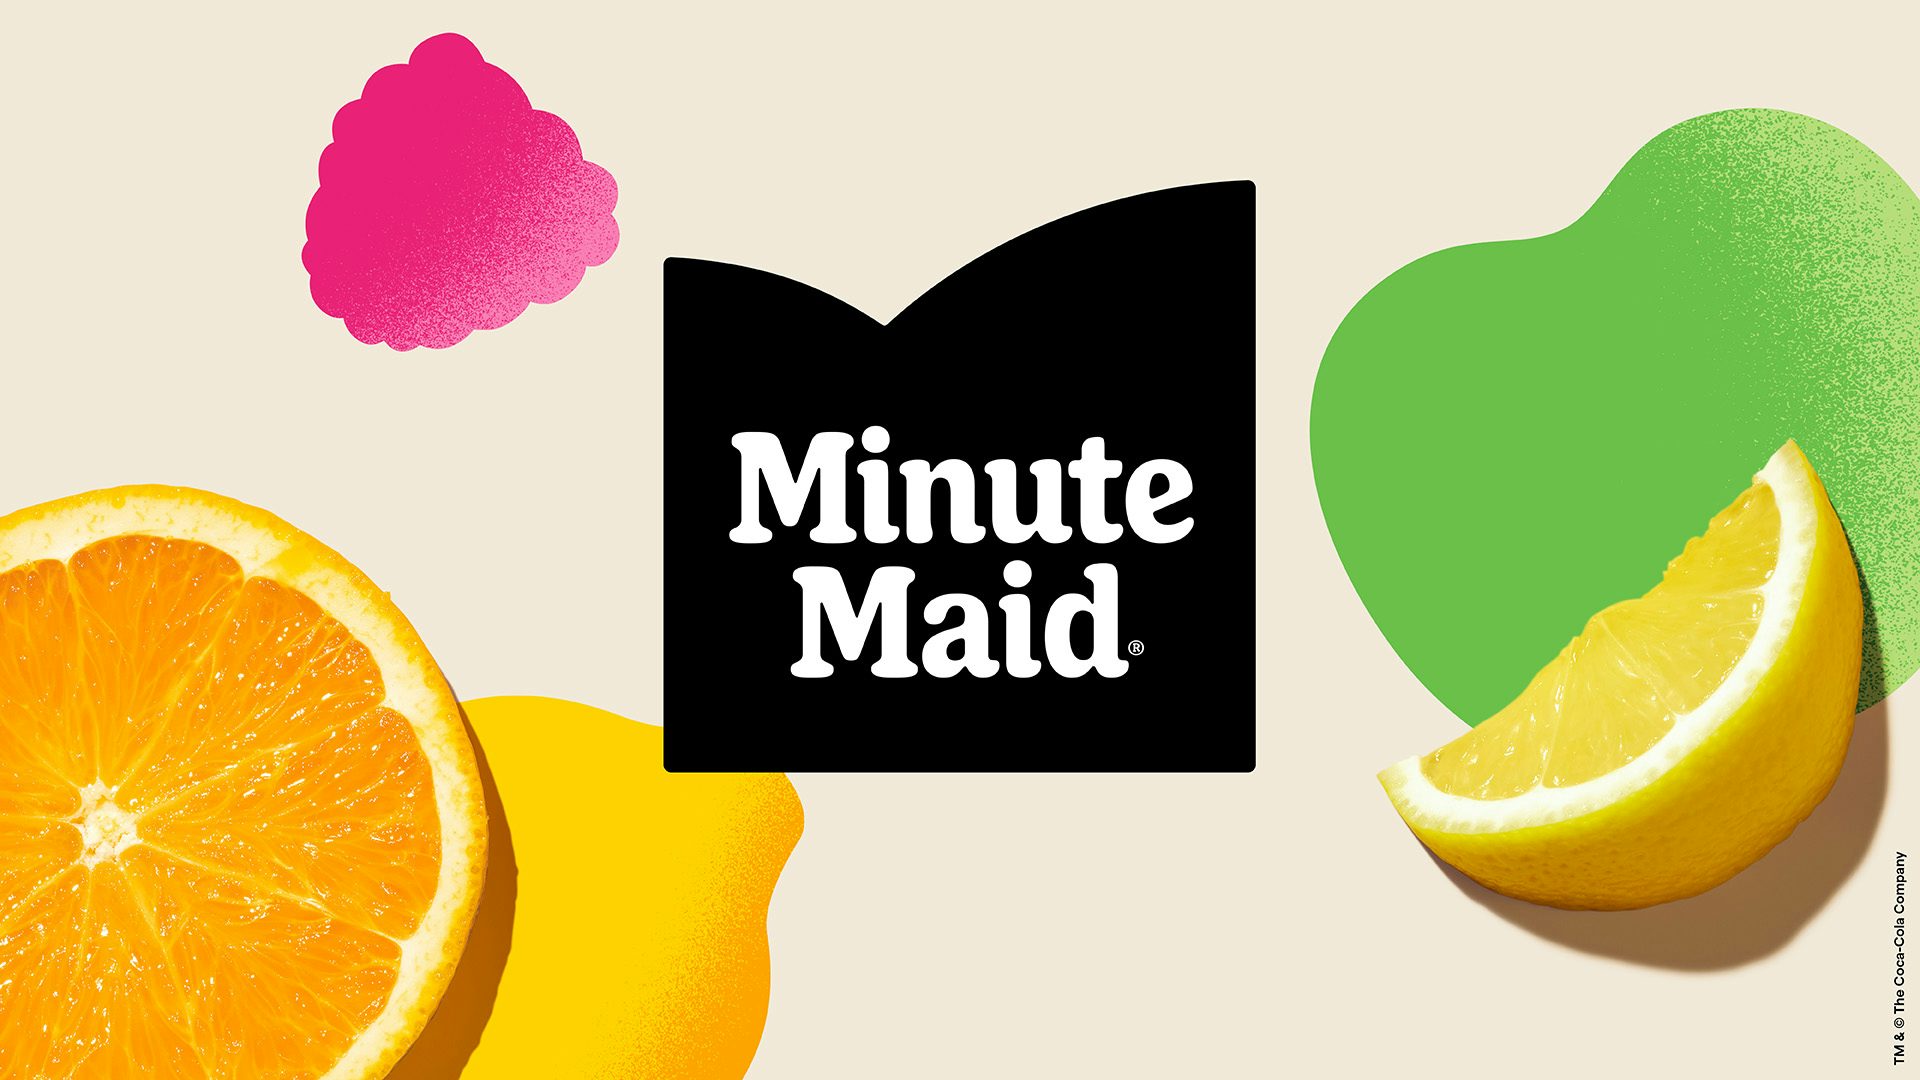 Image of Minute Maid's new logo, featuring a black background with a cut-out in the shape of two hills meeting, and a white rounded serif font, against a background of illustrations and photos of fruit